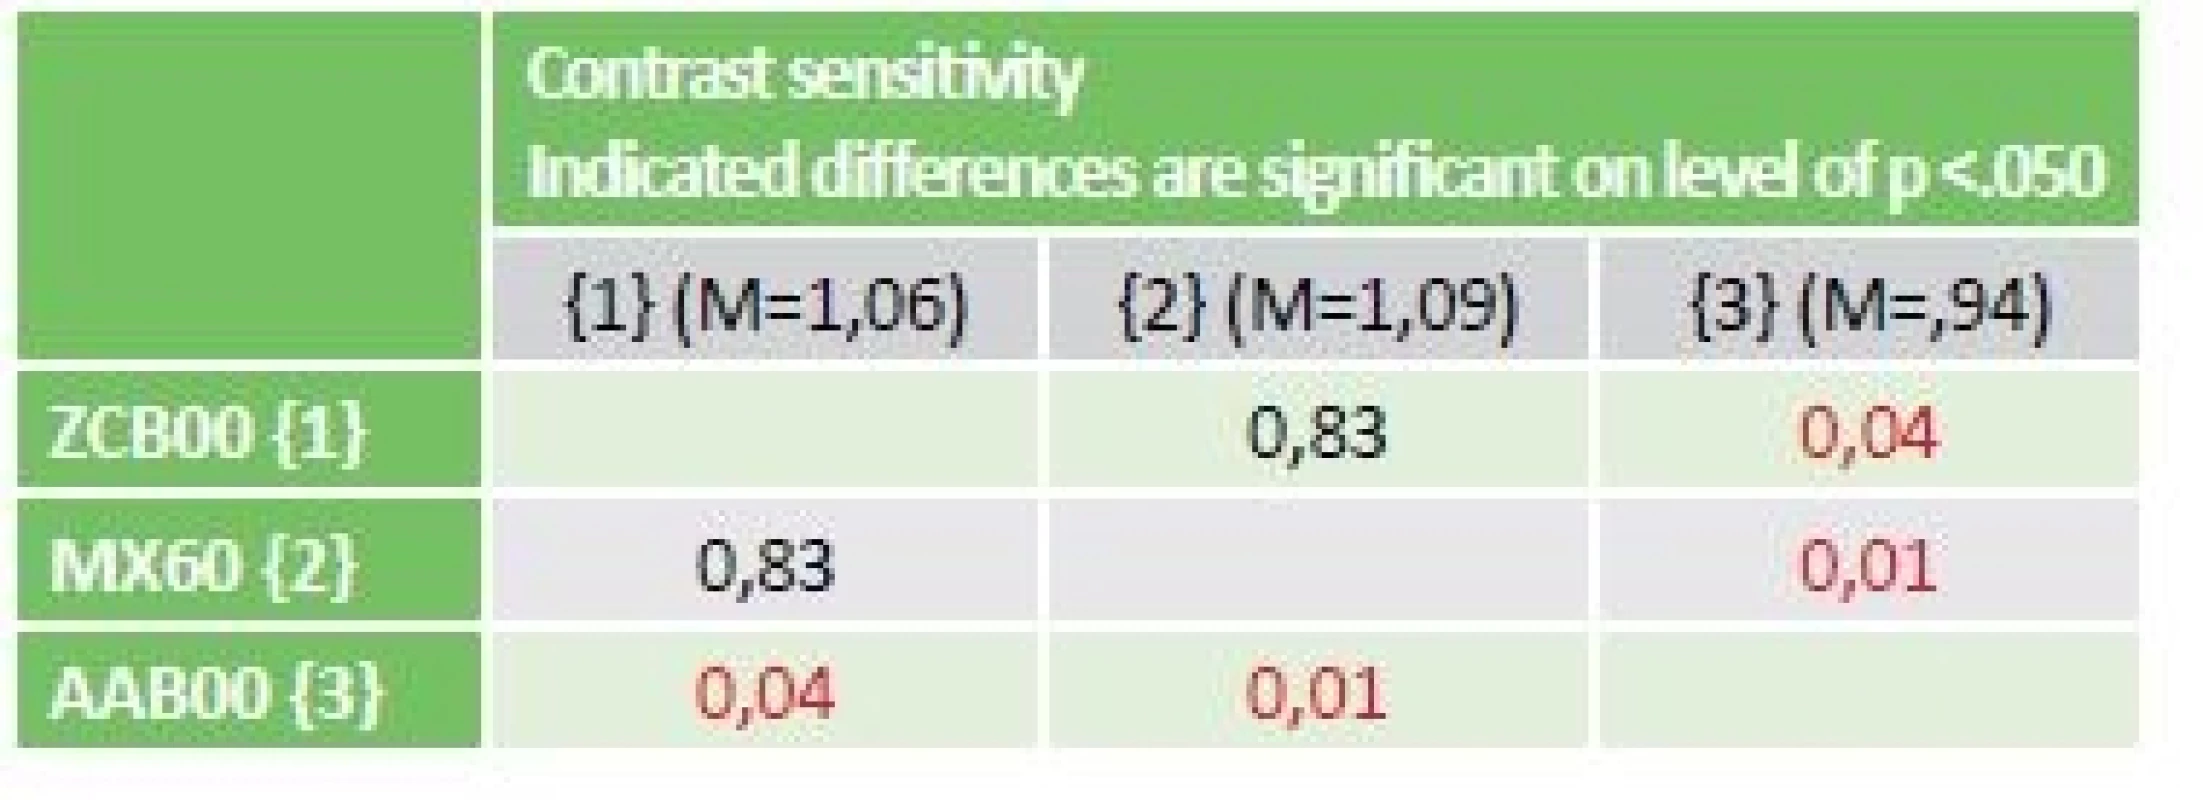 Statistics of difference of contrast sensitivity for 3 types of IOL.